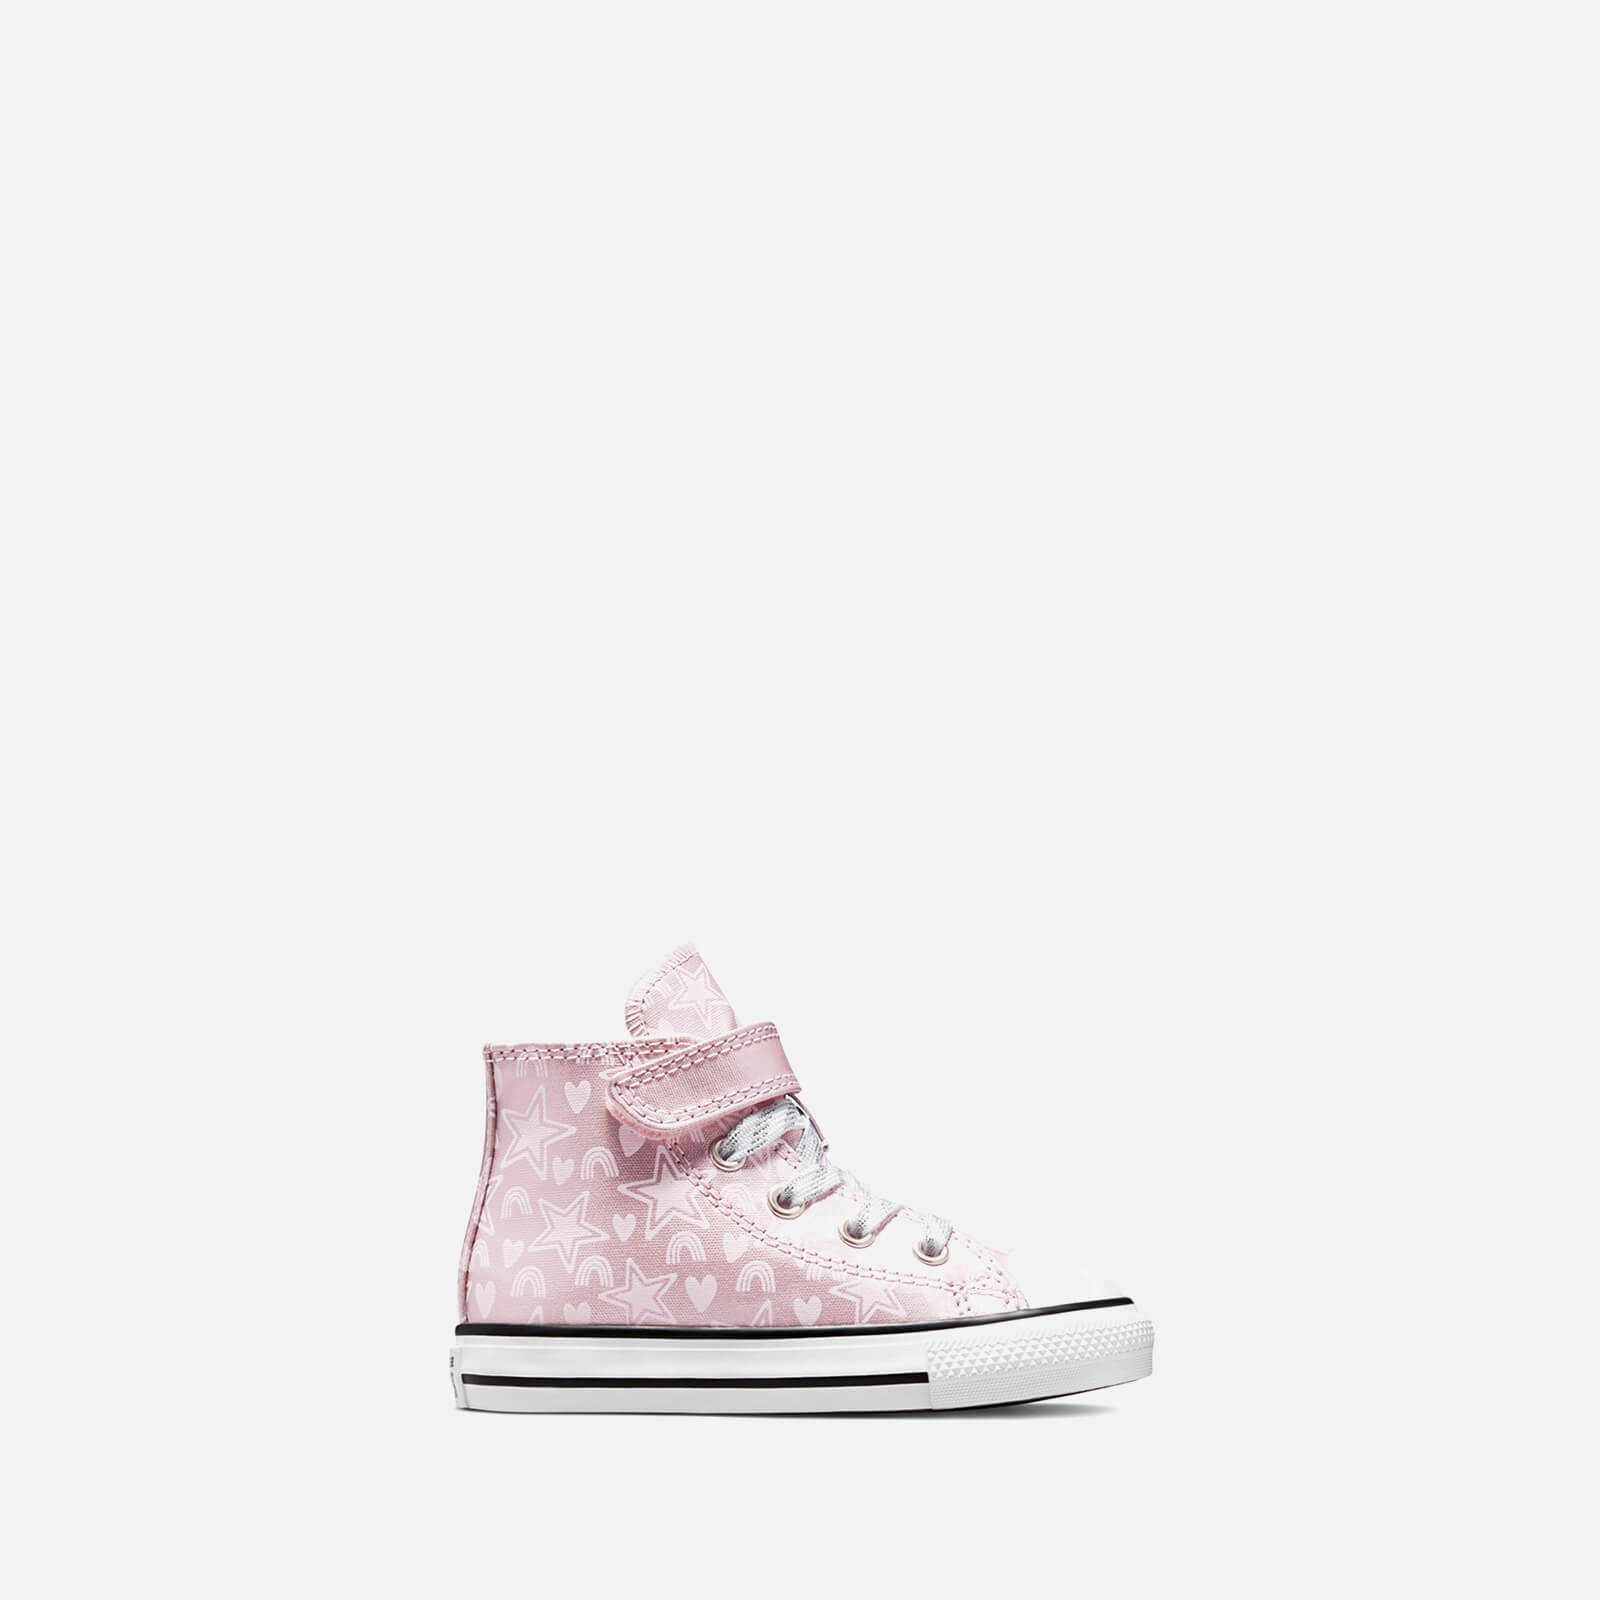 Converse Toddlers' Chuck Taylor All Star 1V Trainers - Pink Foam/Egret/White - UK 6 Toddler